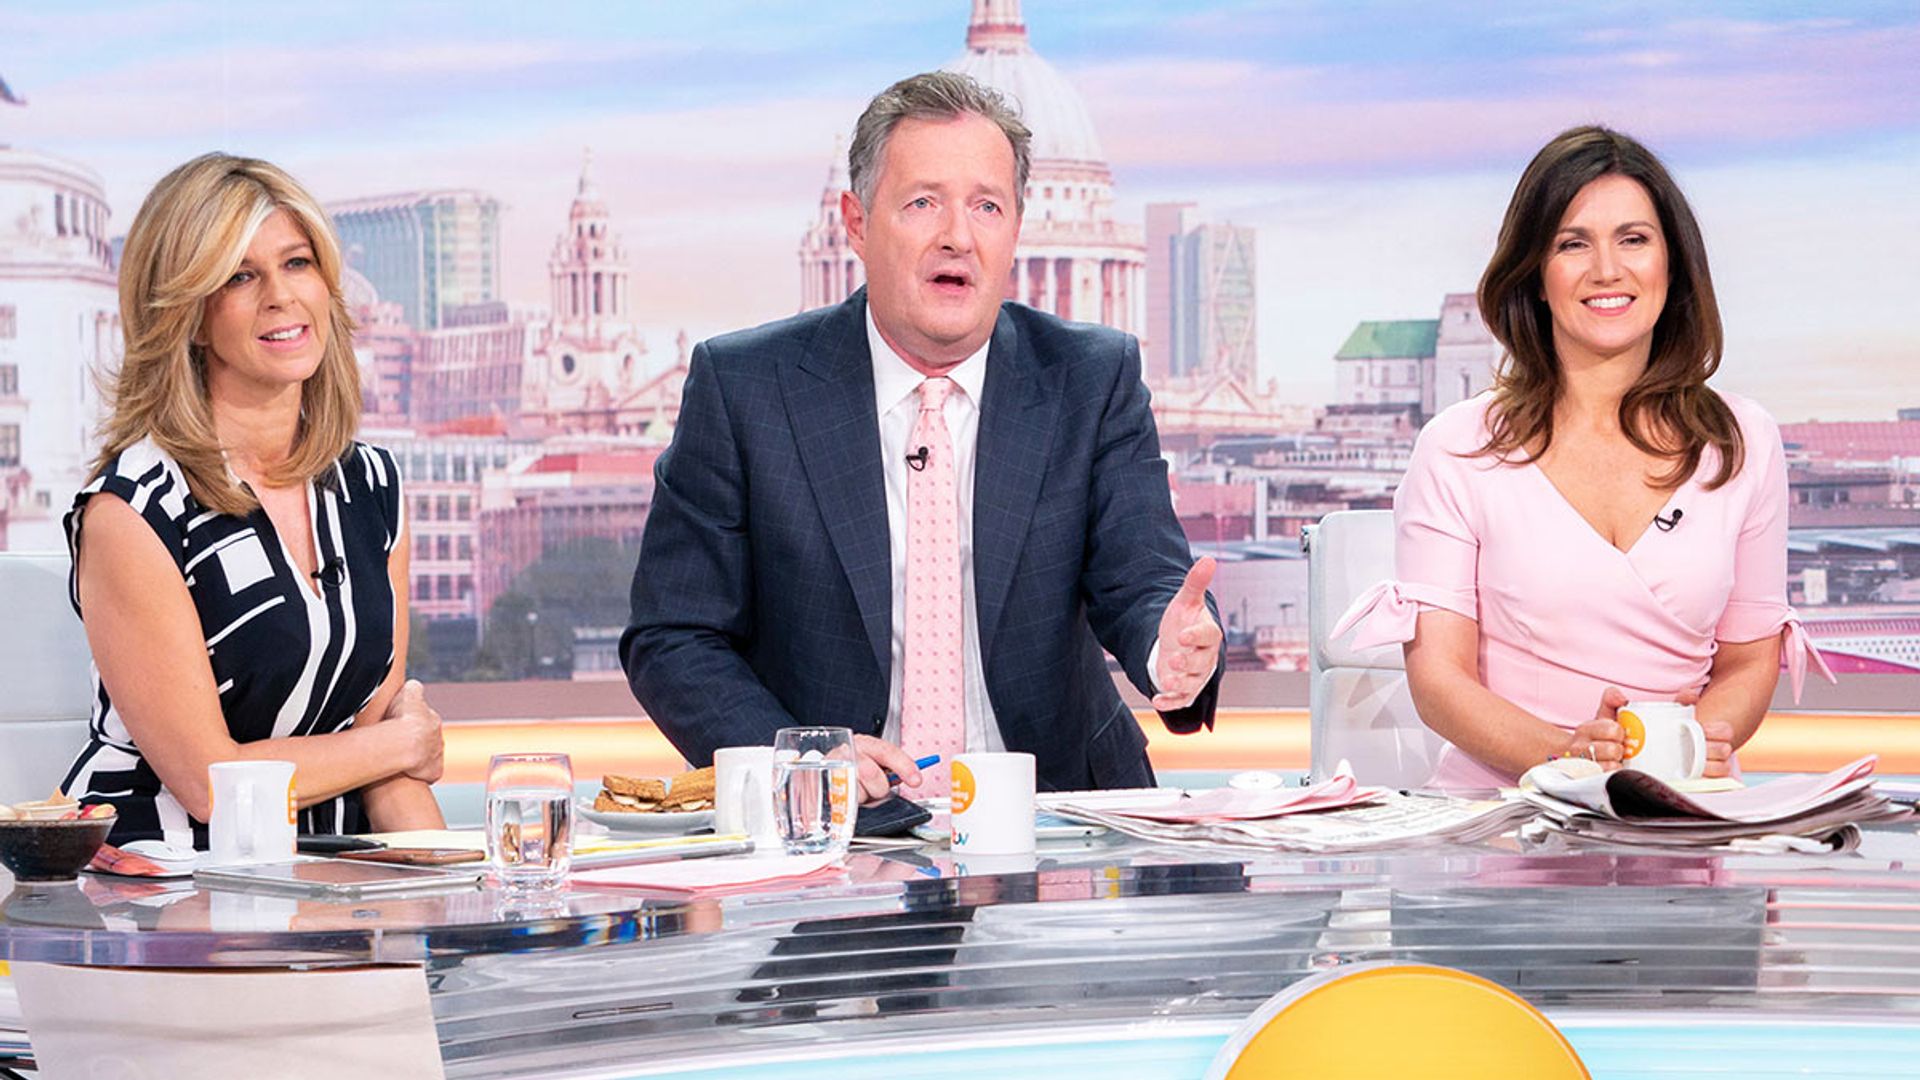 Tearful Piers Morgan and Susanna Reid give update on Kate Garraway's husband's condition after coronavirus hospitalisation